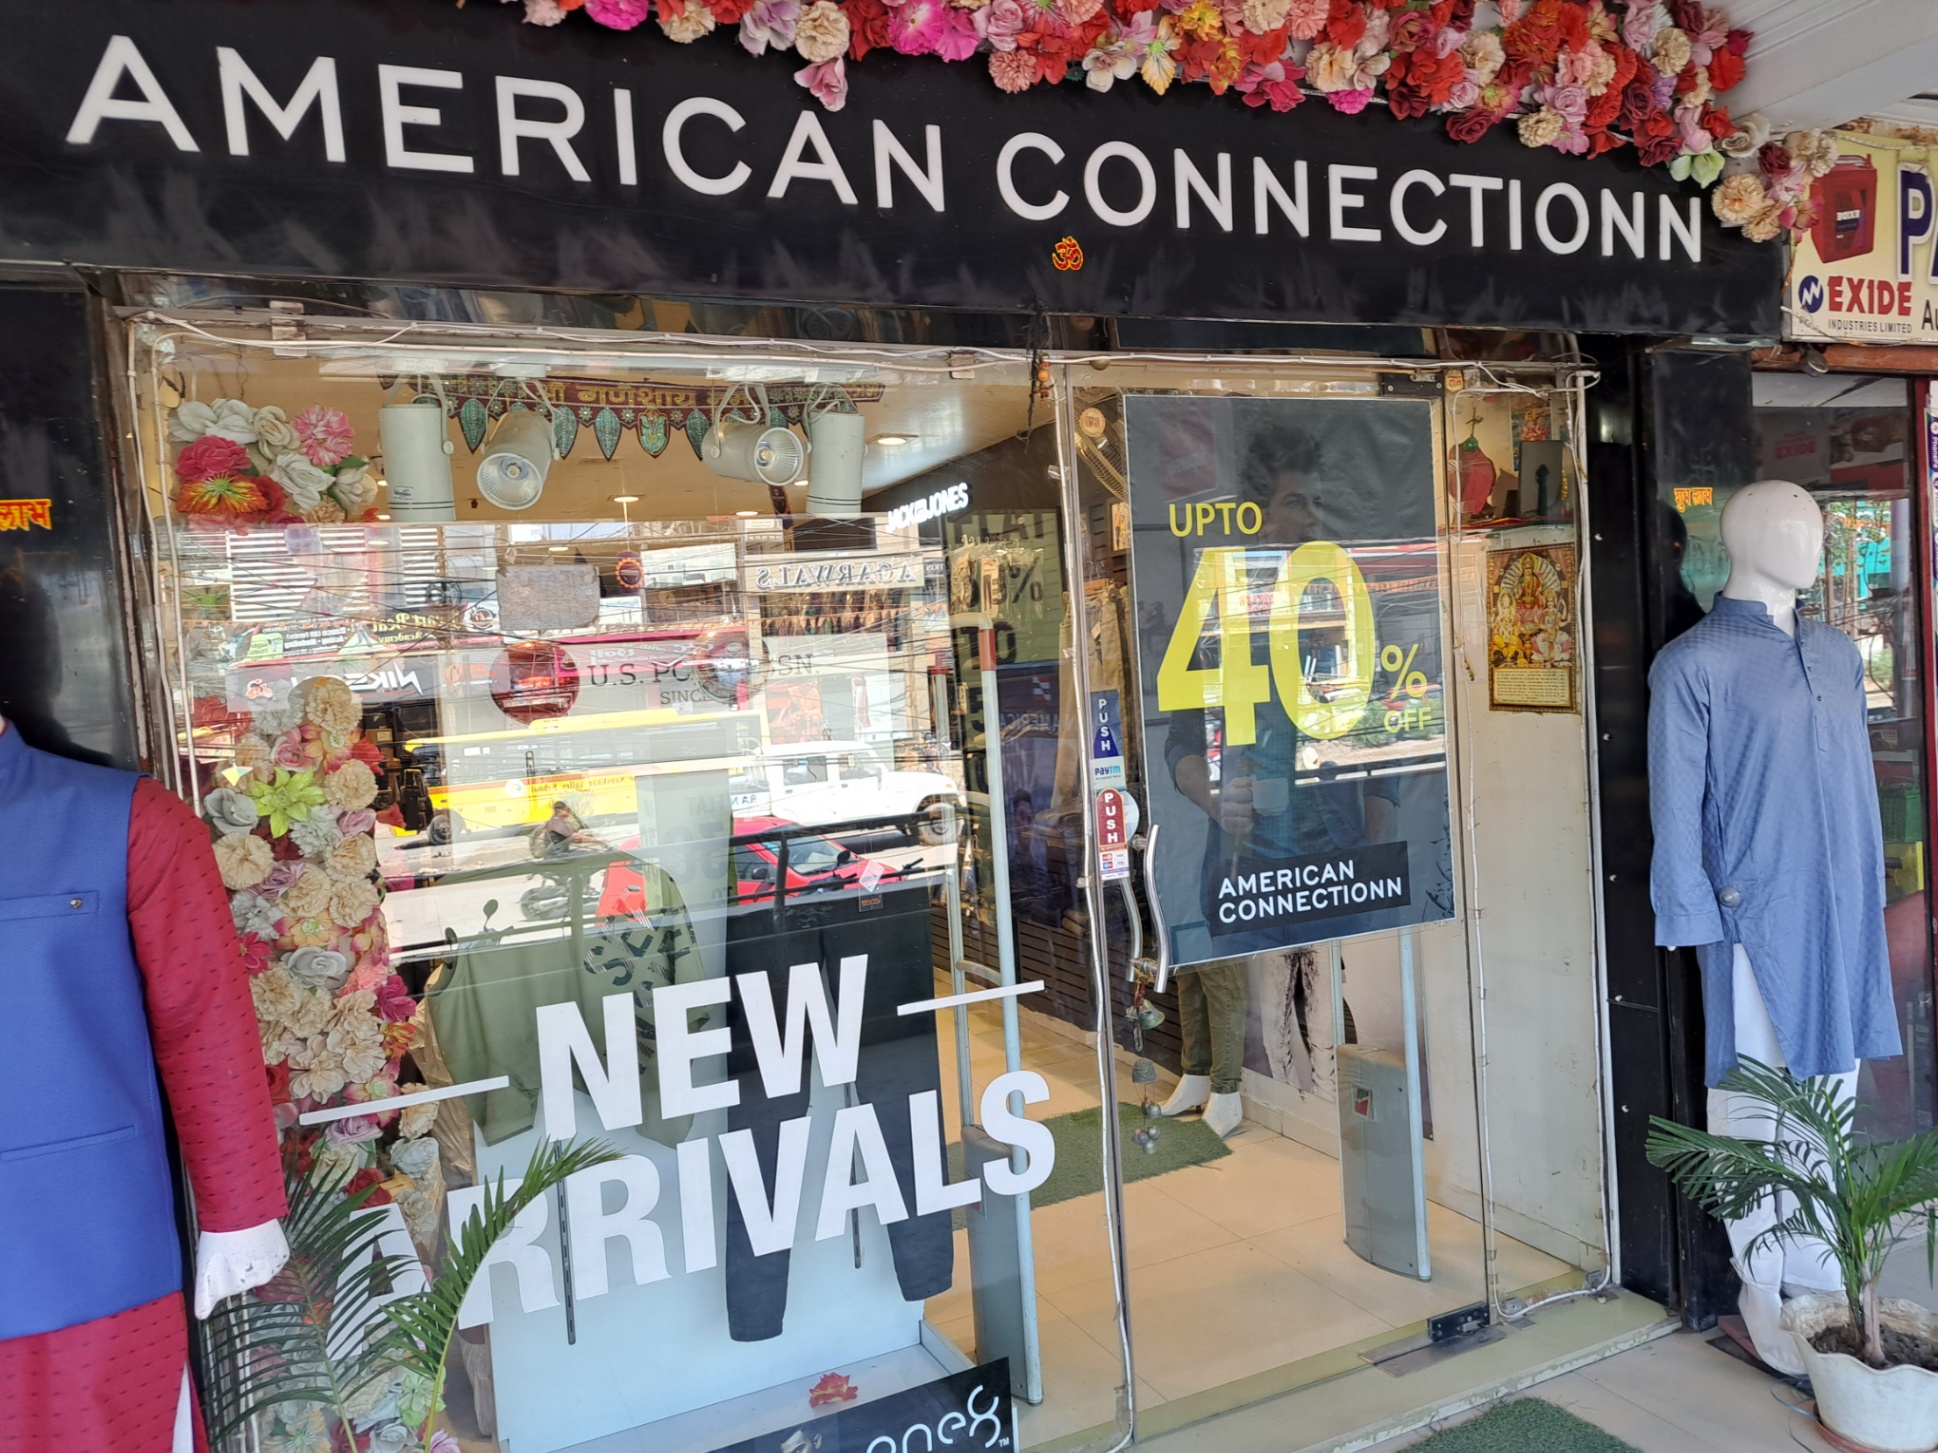 New Deal - Upto ₹40 off @Americon Connectionn, New Market, Bhopal